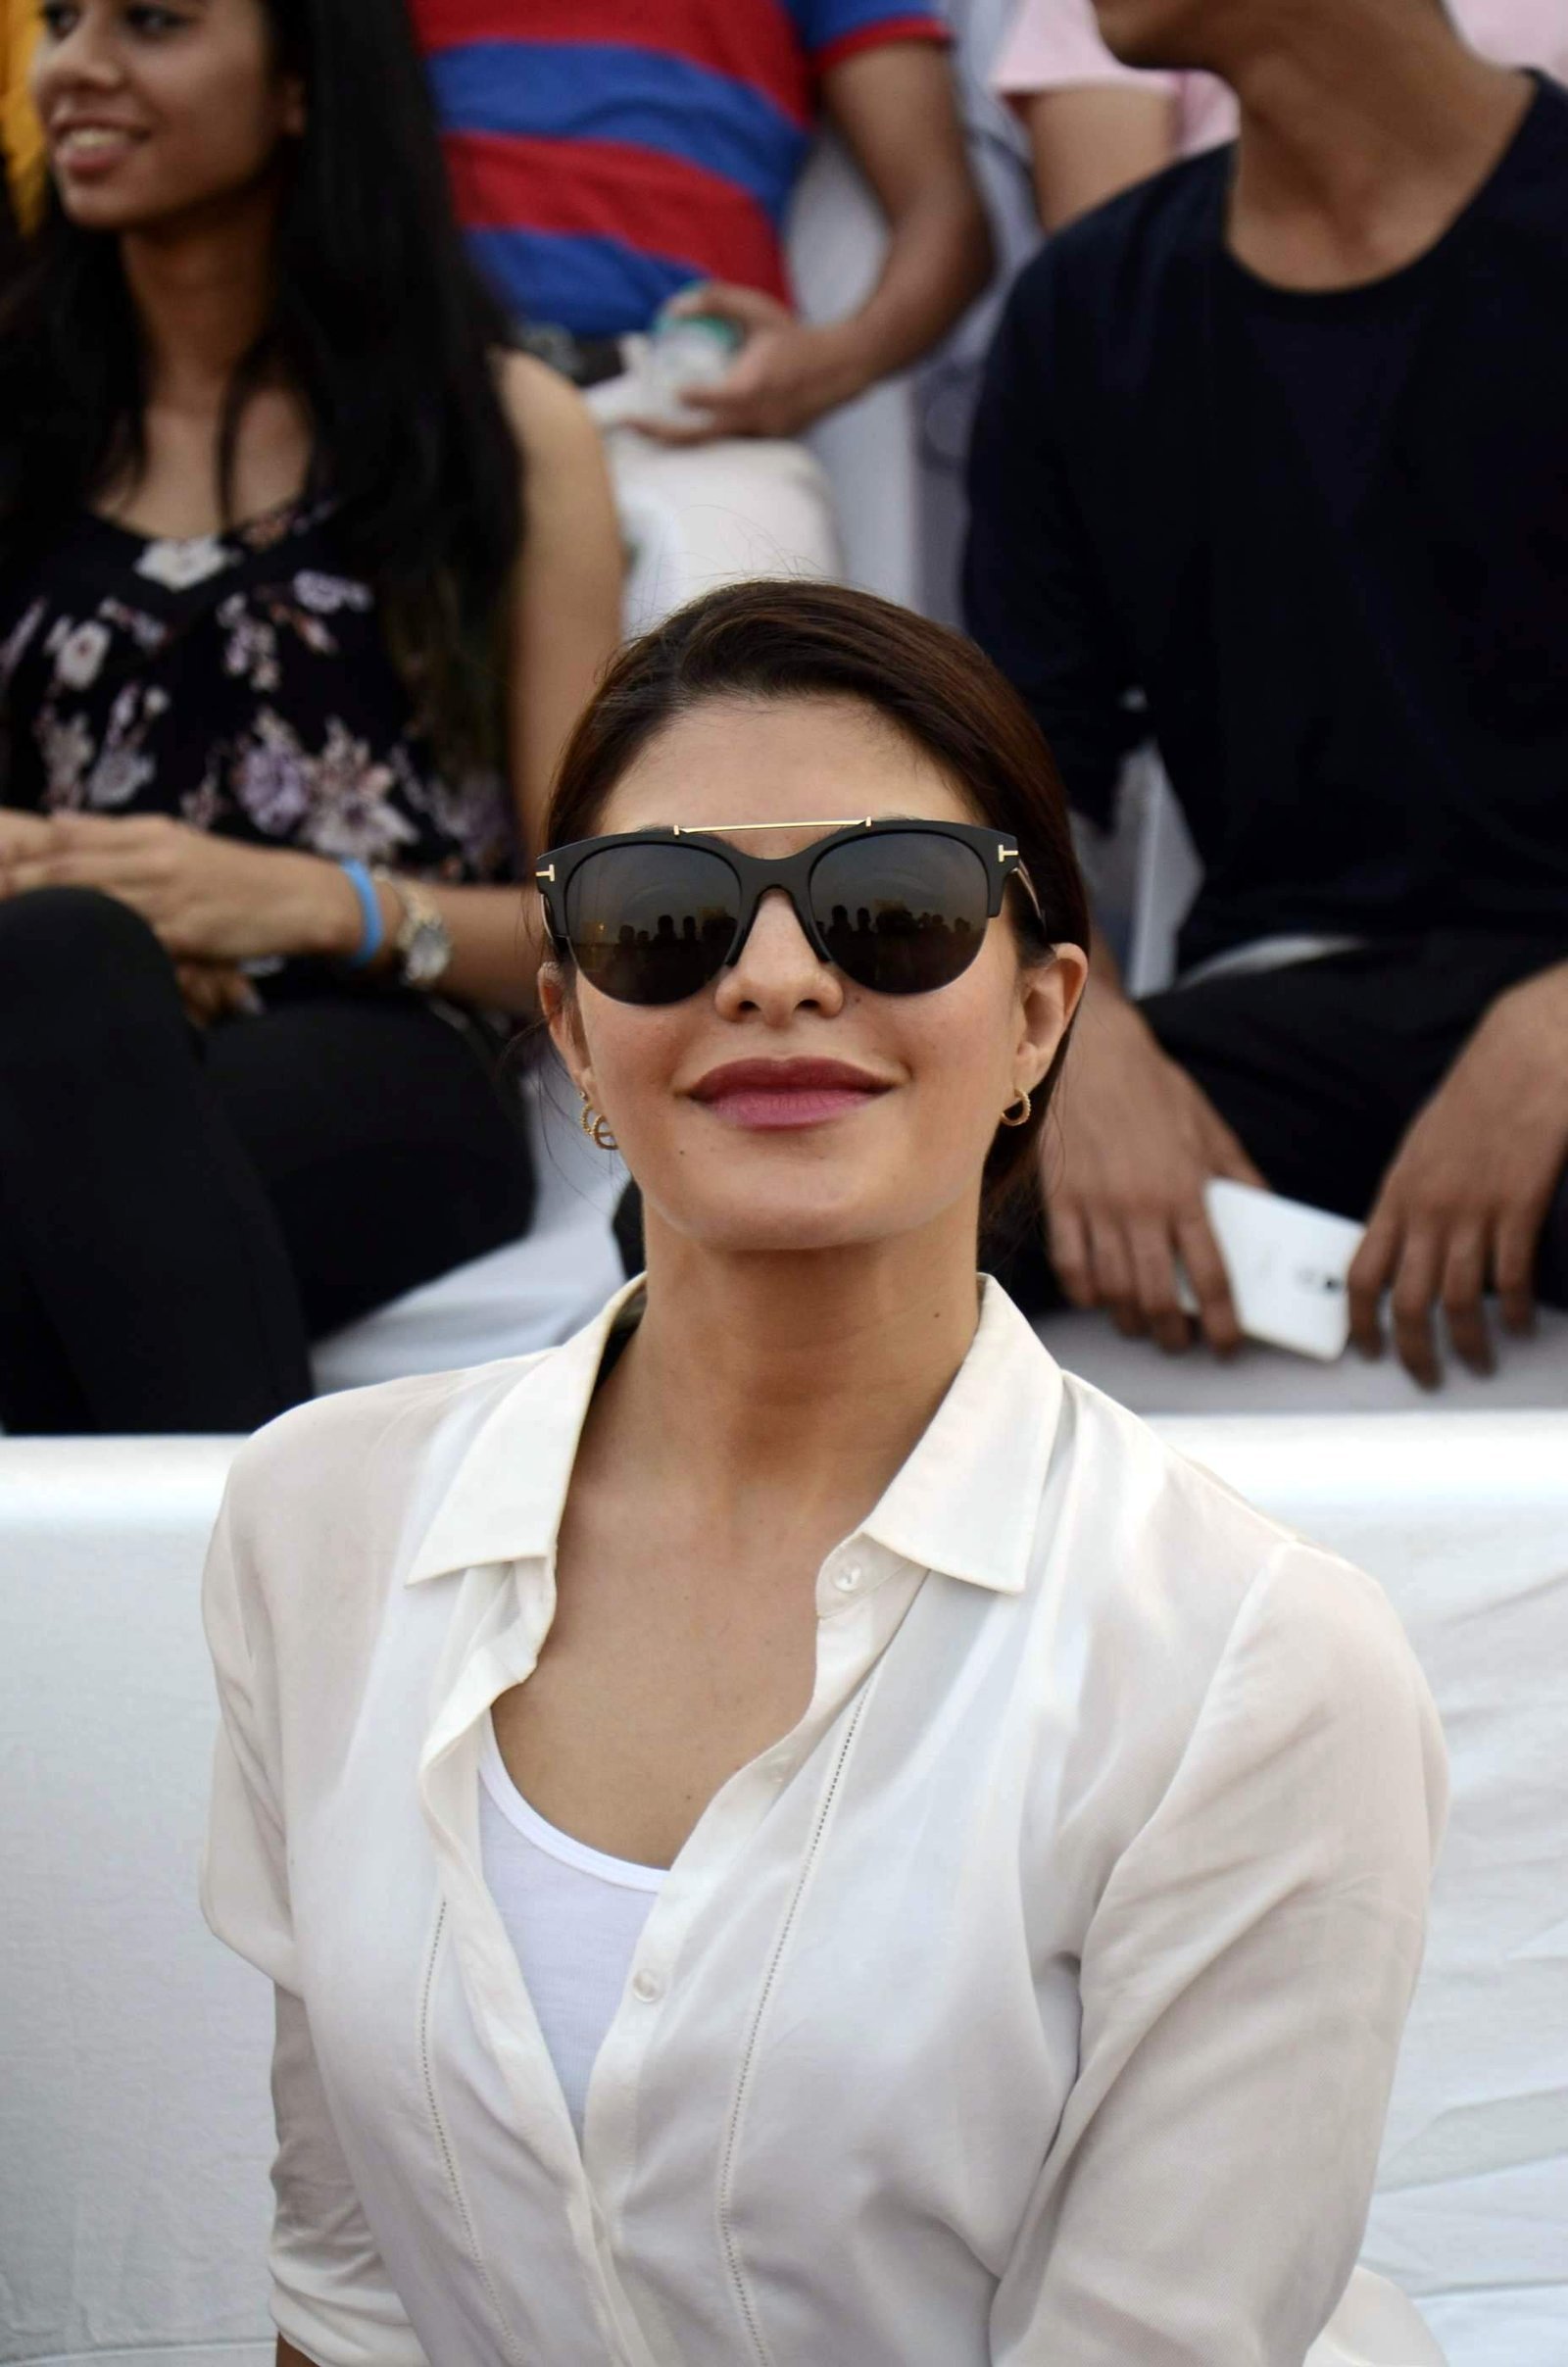 Jacqueline Fernandez At Horse Jumping Competition Race Course Images | Picture 1486553